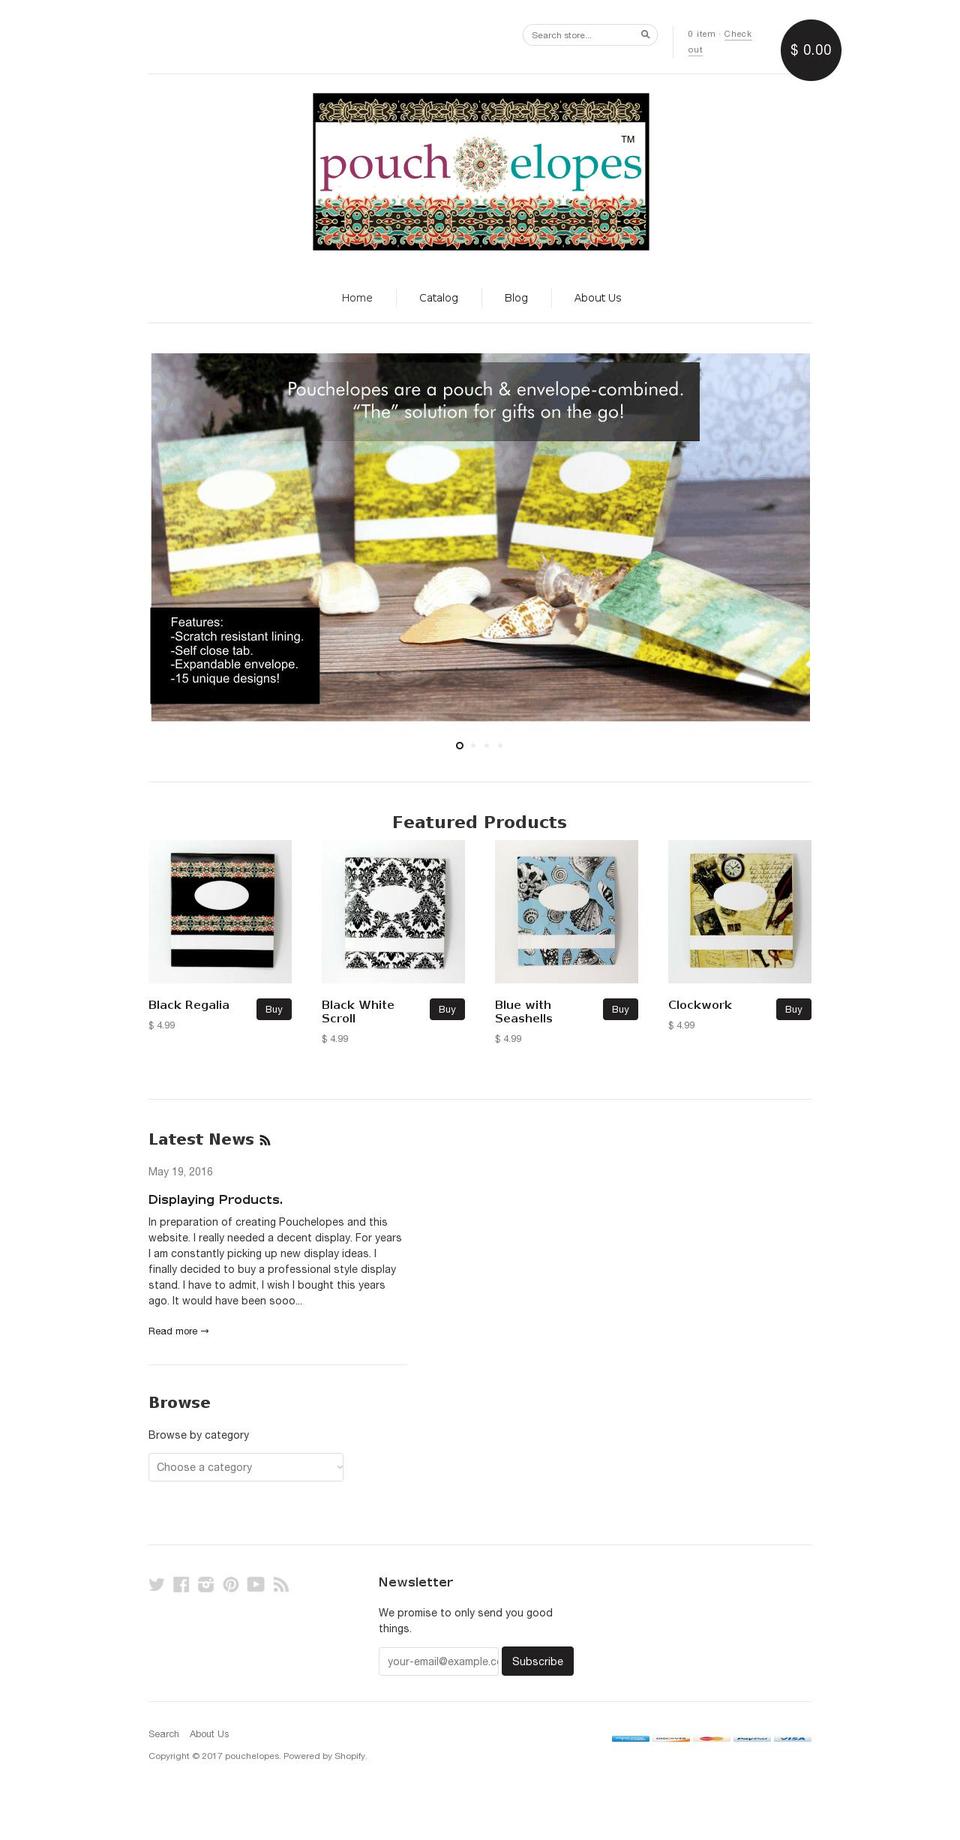 new-standard Shopify theme site example pouchelopes.com